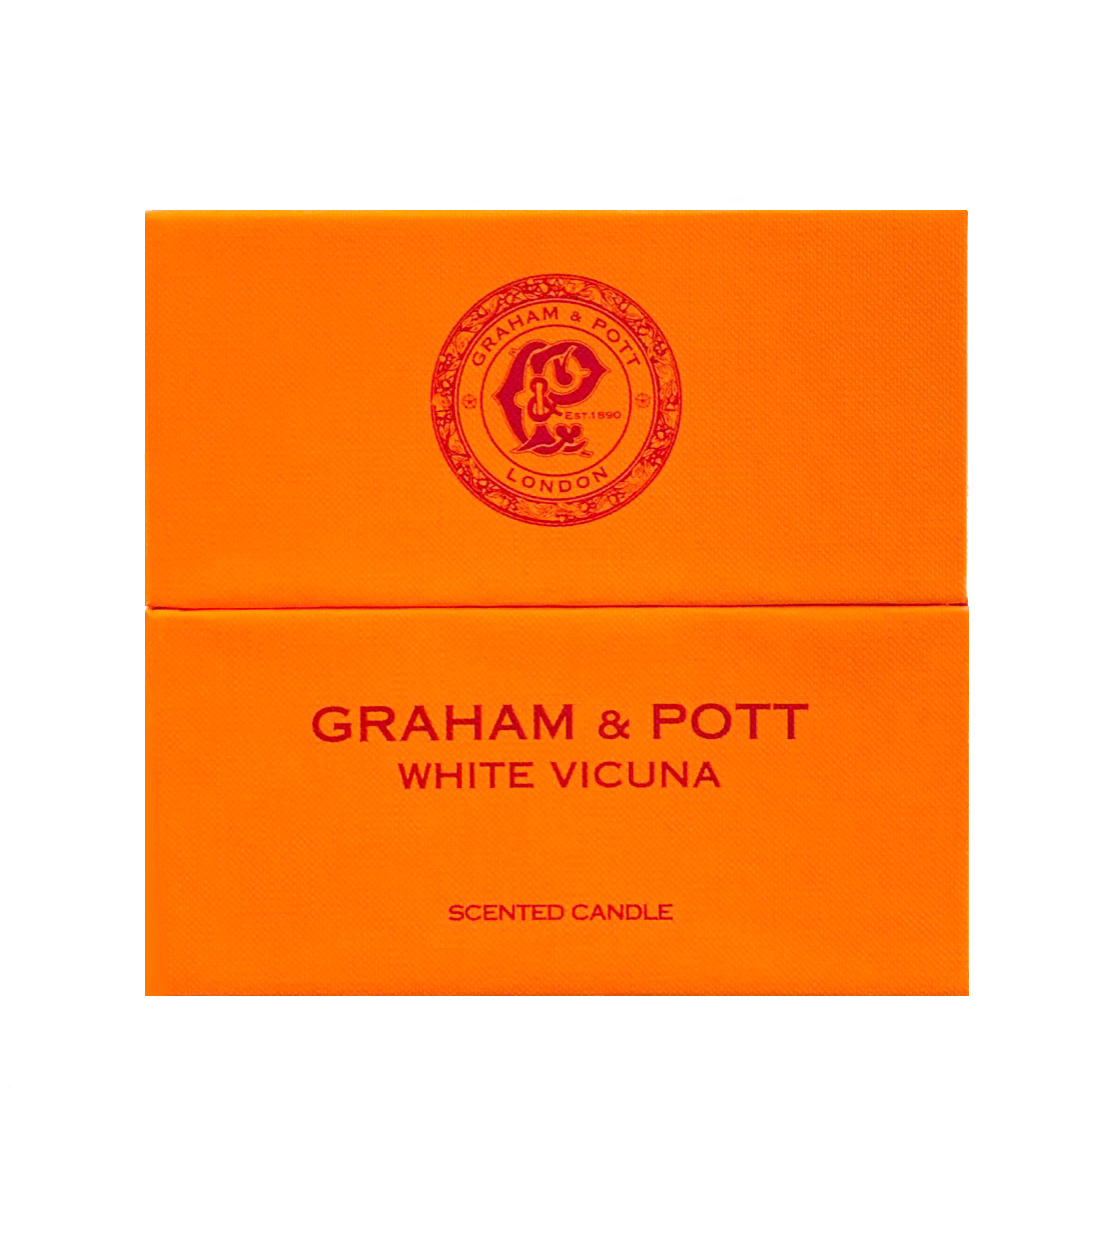 WHITE VICUNA Scented Candle - GRAHAM & POTT